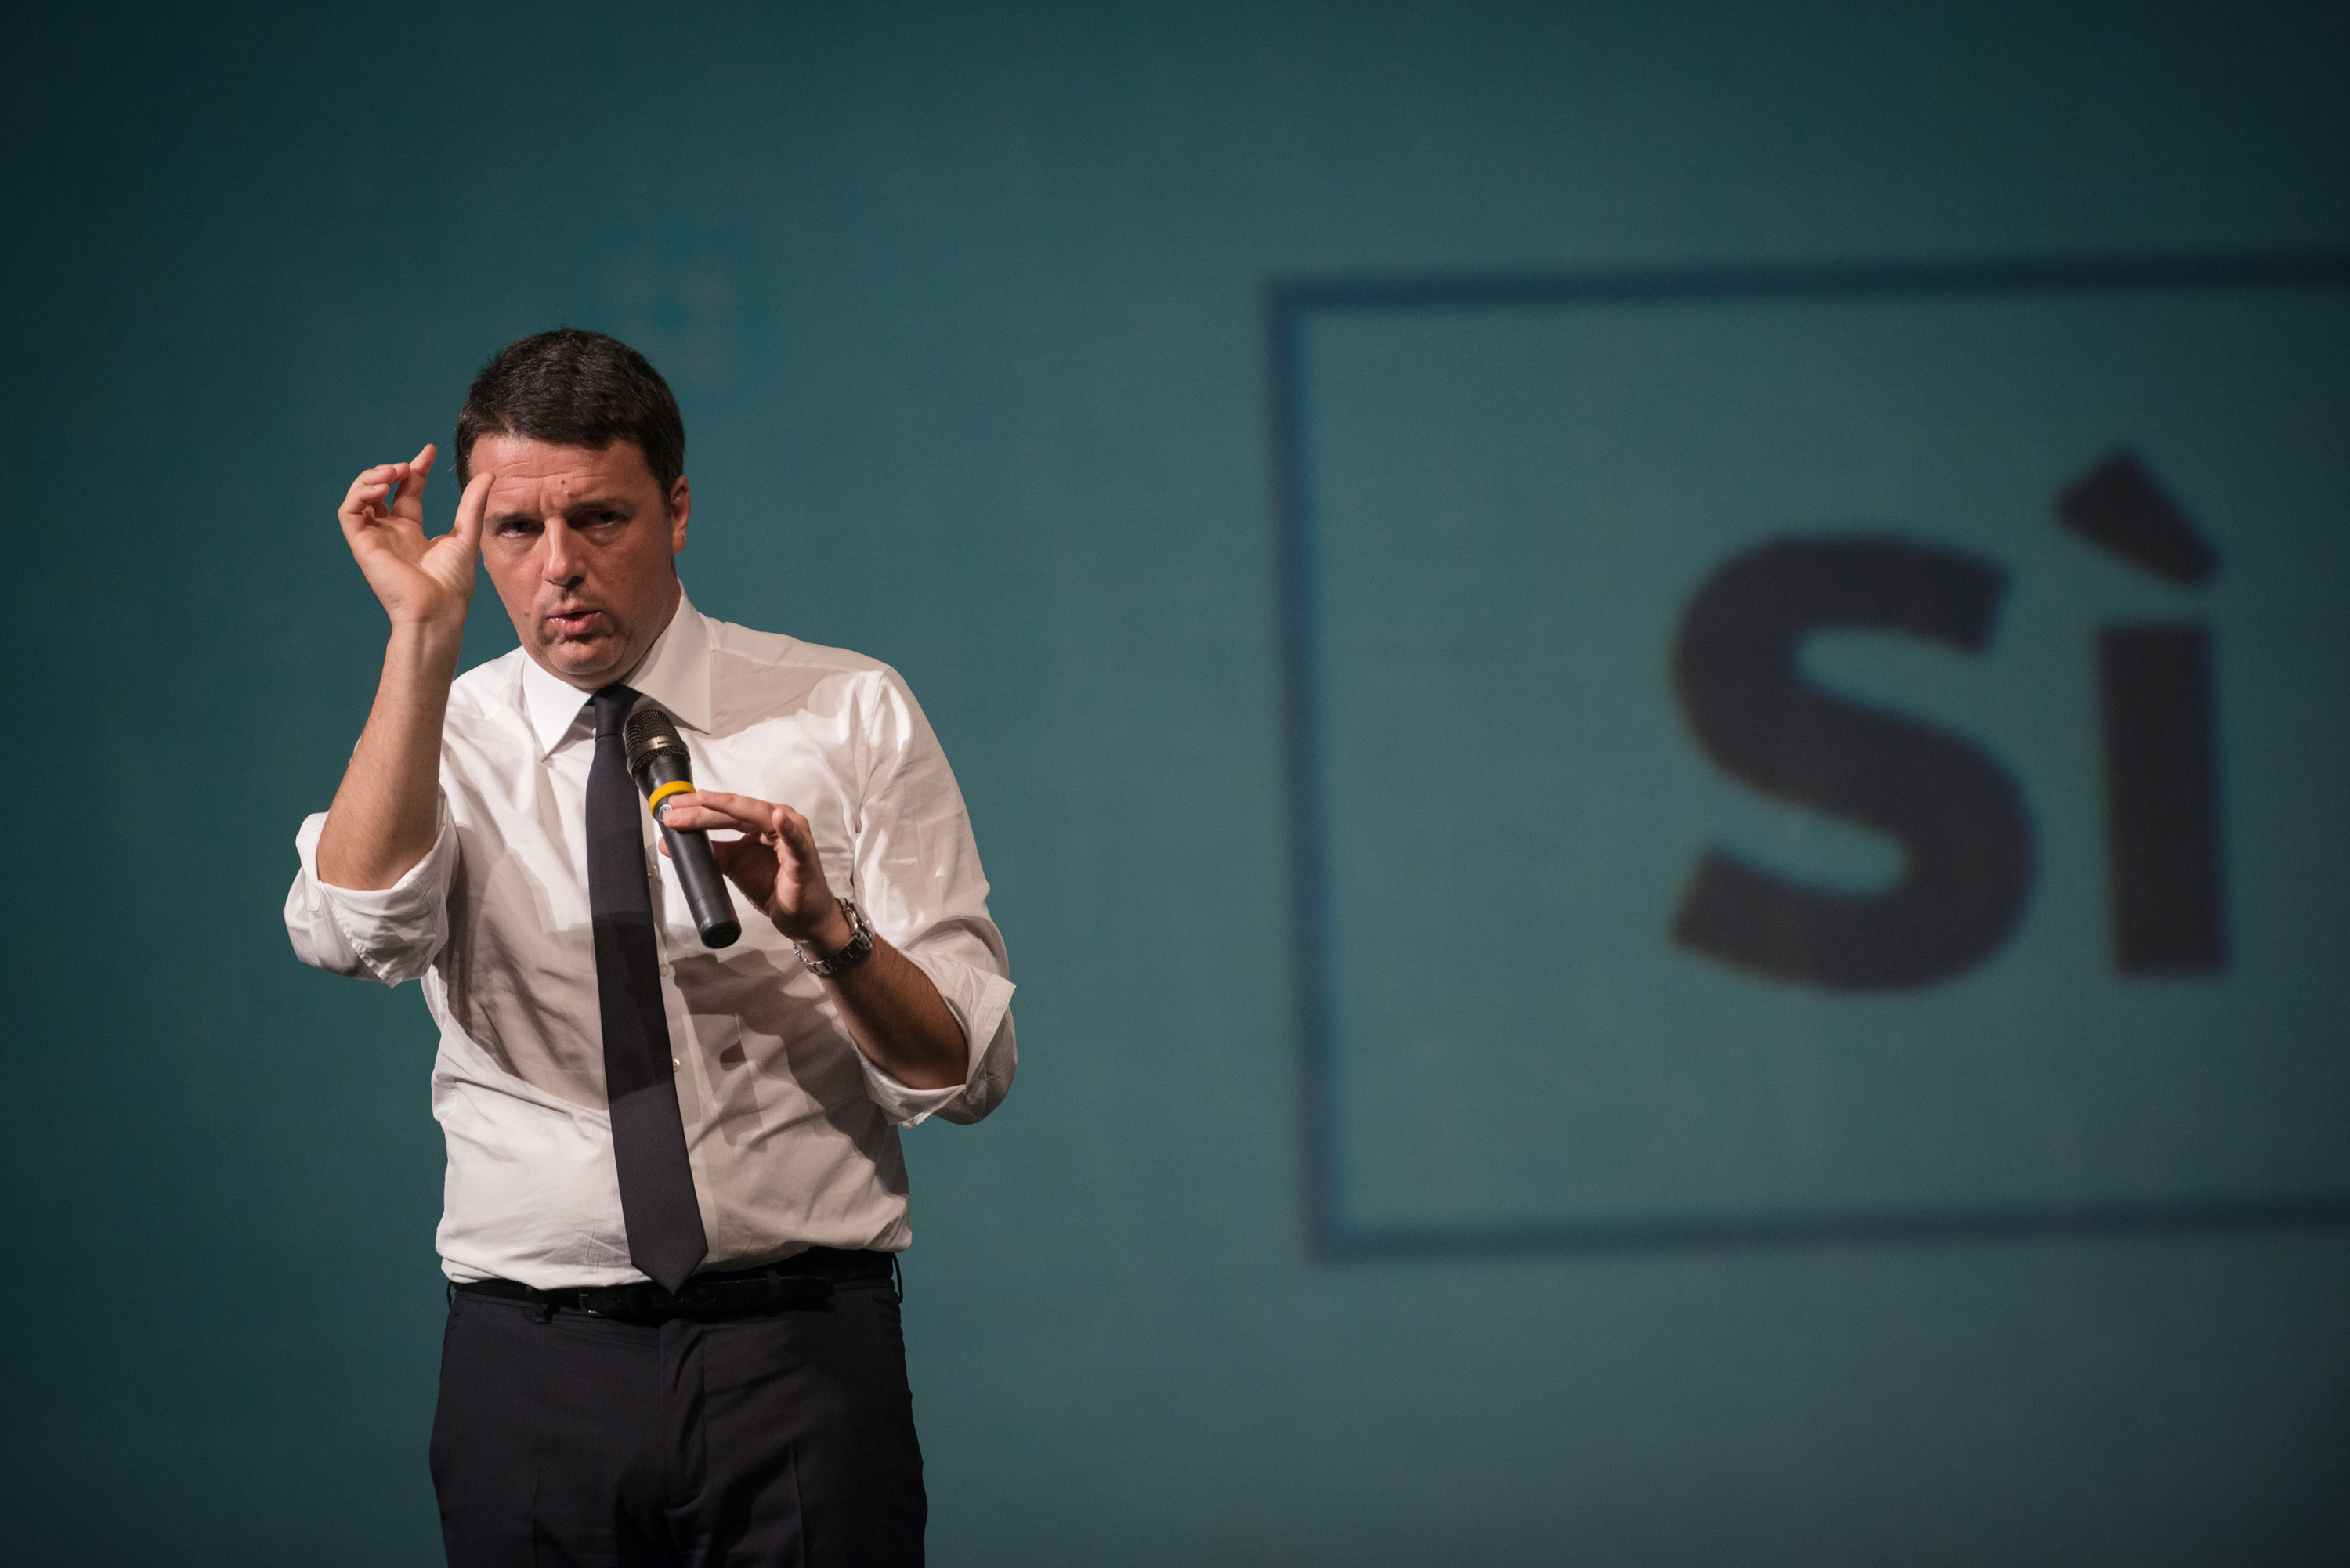 Italian Prime Minister Renzi during a Pro Yes conference for the Constitutional Referendum on Oct. 26. The constitutional reform at the base of the referendum will serve to lighten the cost of politics and the powers of the Senate. It will be held on December 4, 2016. (Michele Amoruso/Pacific Press—LightRocket via Getty Images)